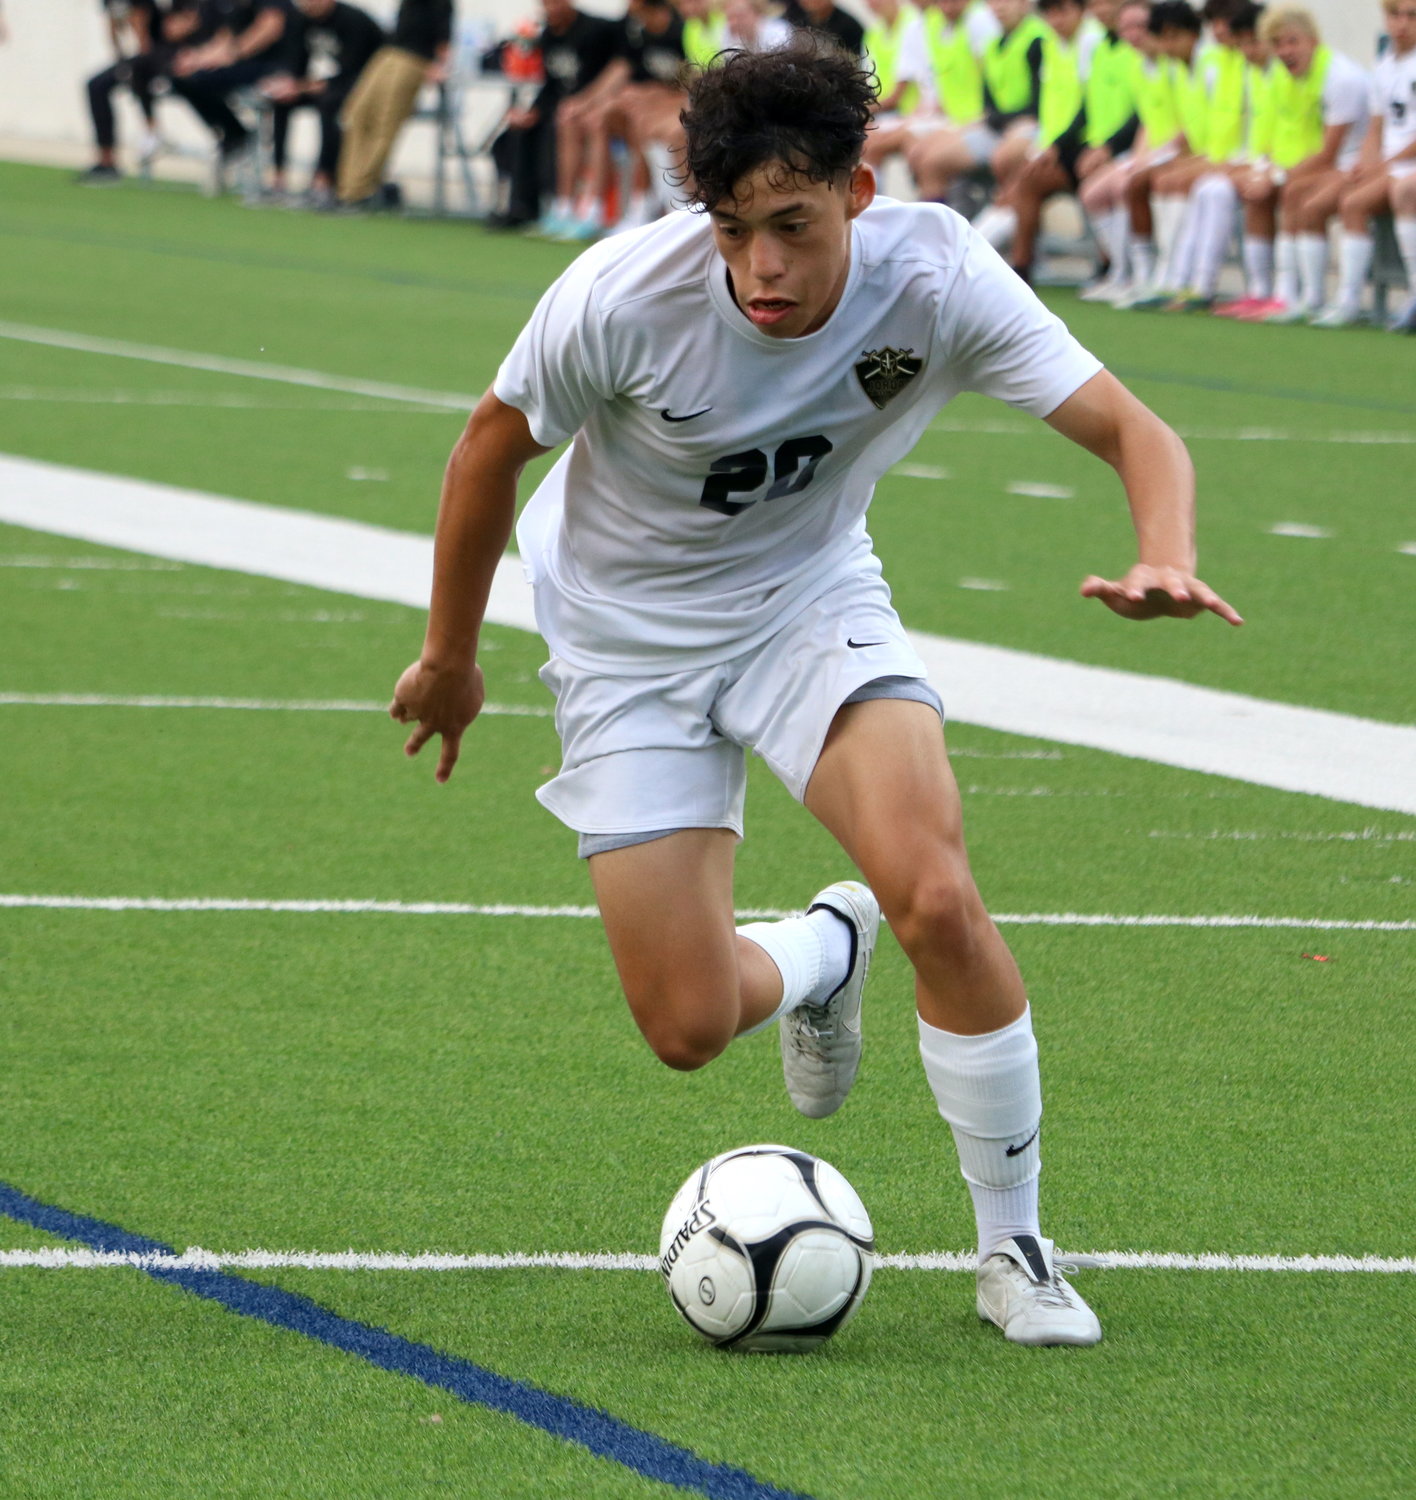 Kevin Sanoja dribbles during Friday's Class 6A Regional Quarterfinal between Jordan and Paetow at Legacy Stadium.